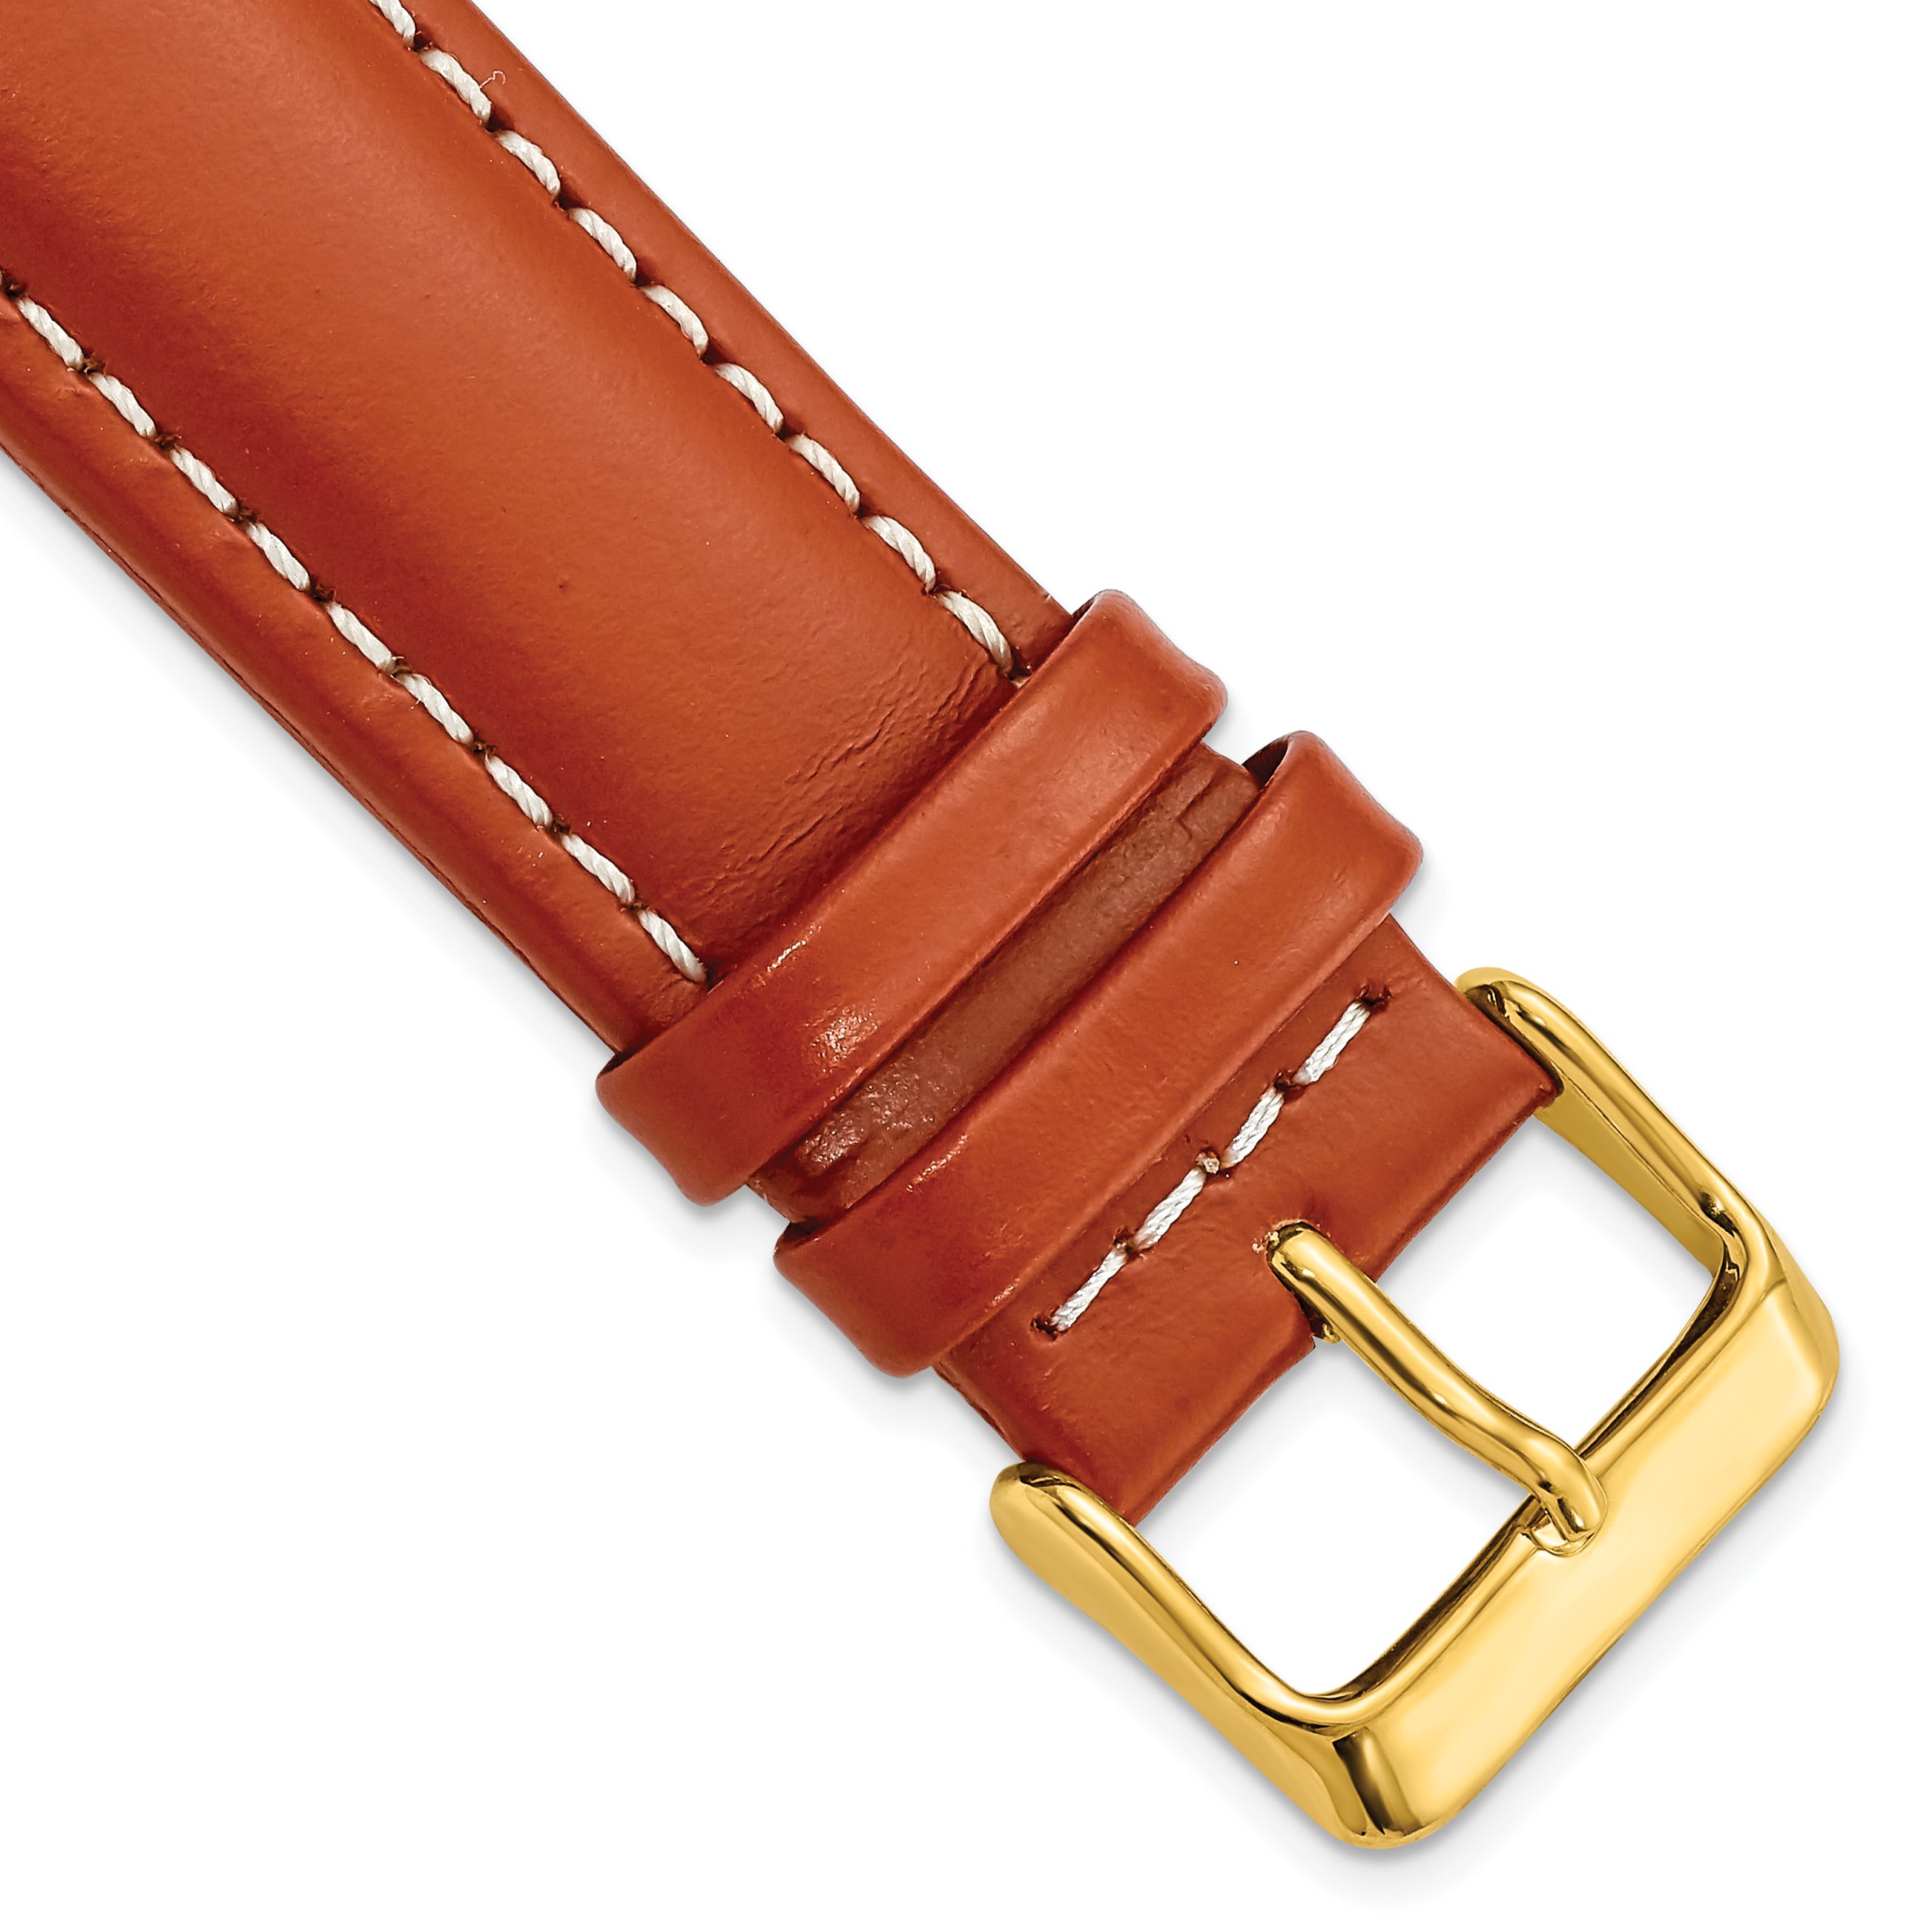 DeBeer 22mm Saddle Brown Oil-tanned Leather with White Stitching and Gold-tone Buckle 7.5 inch Watch Band